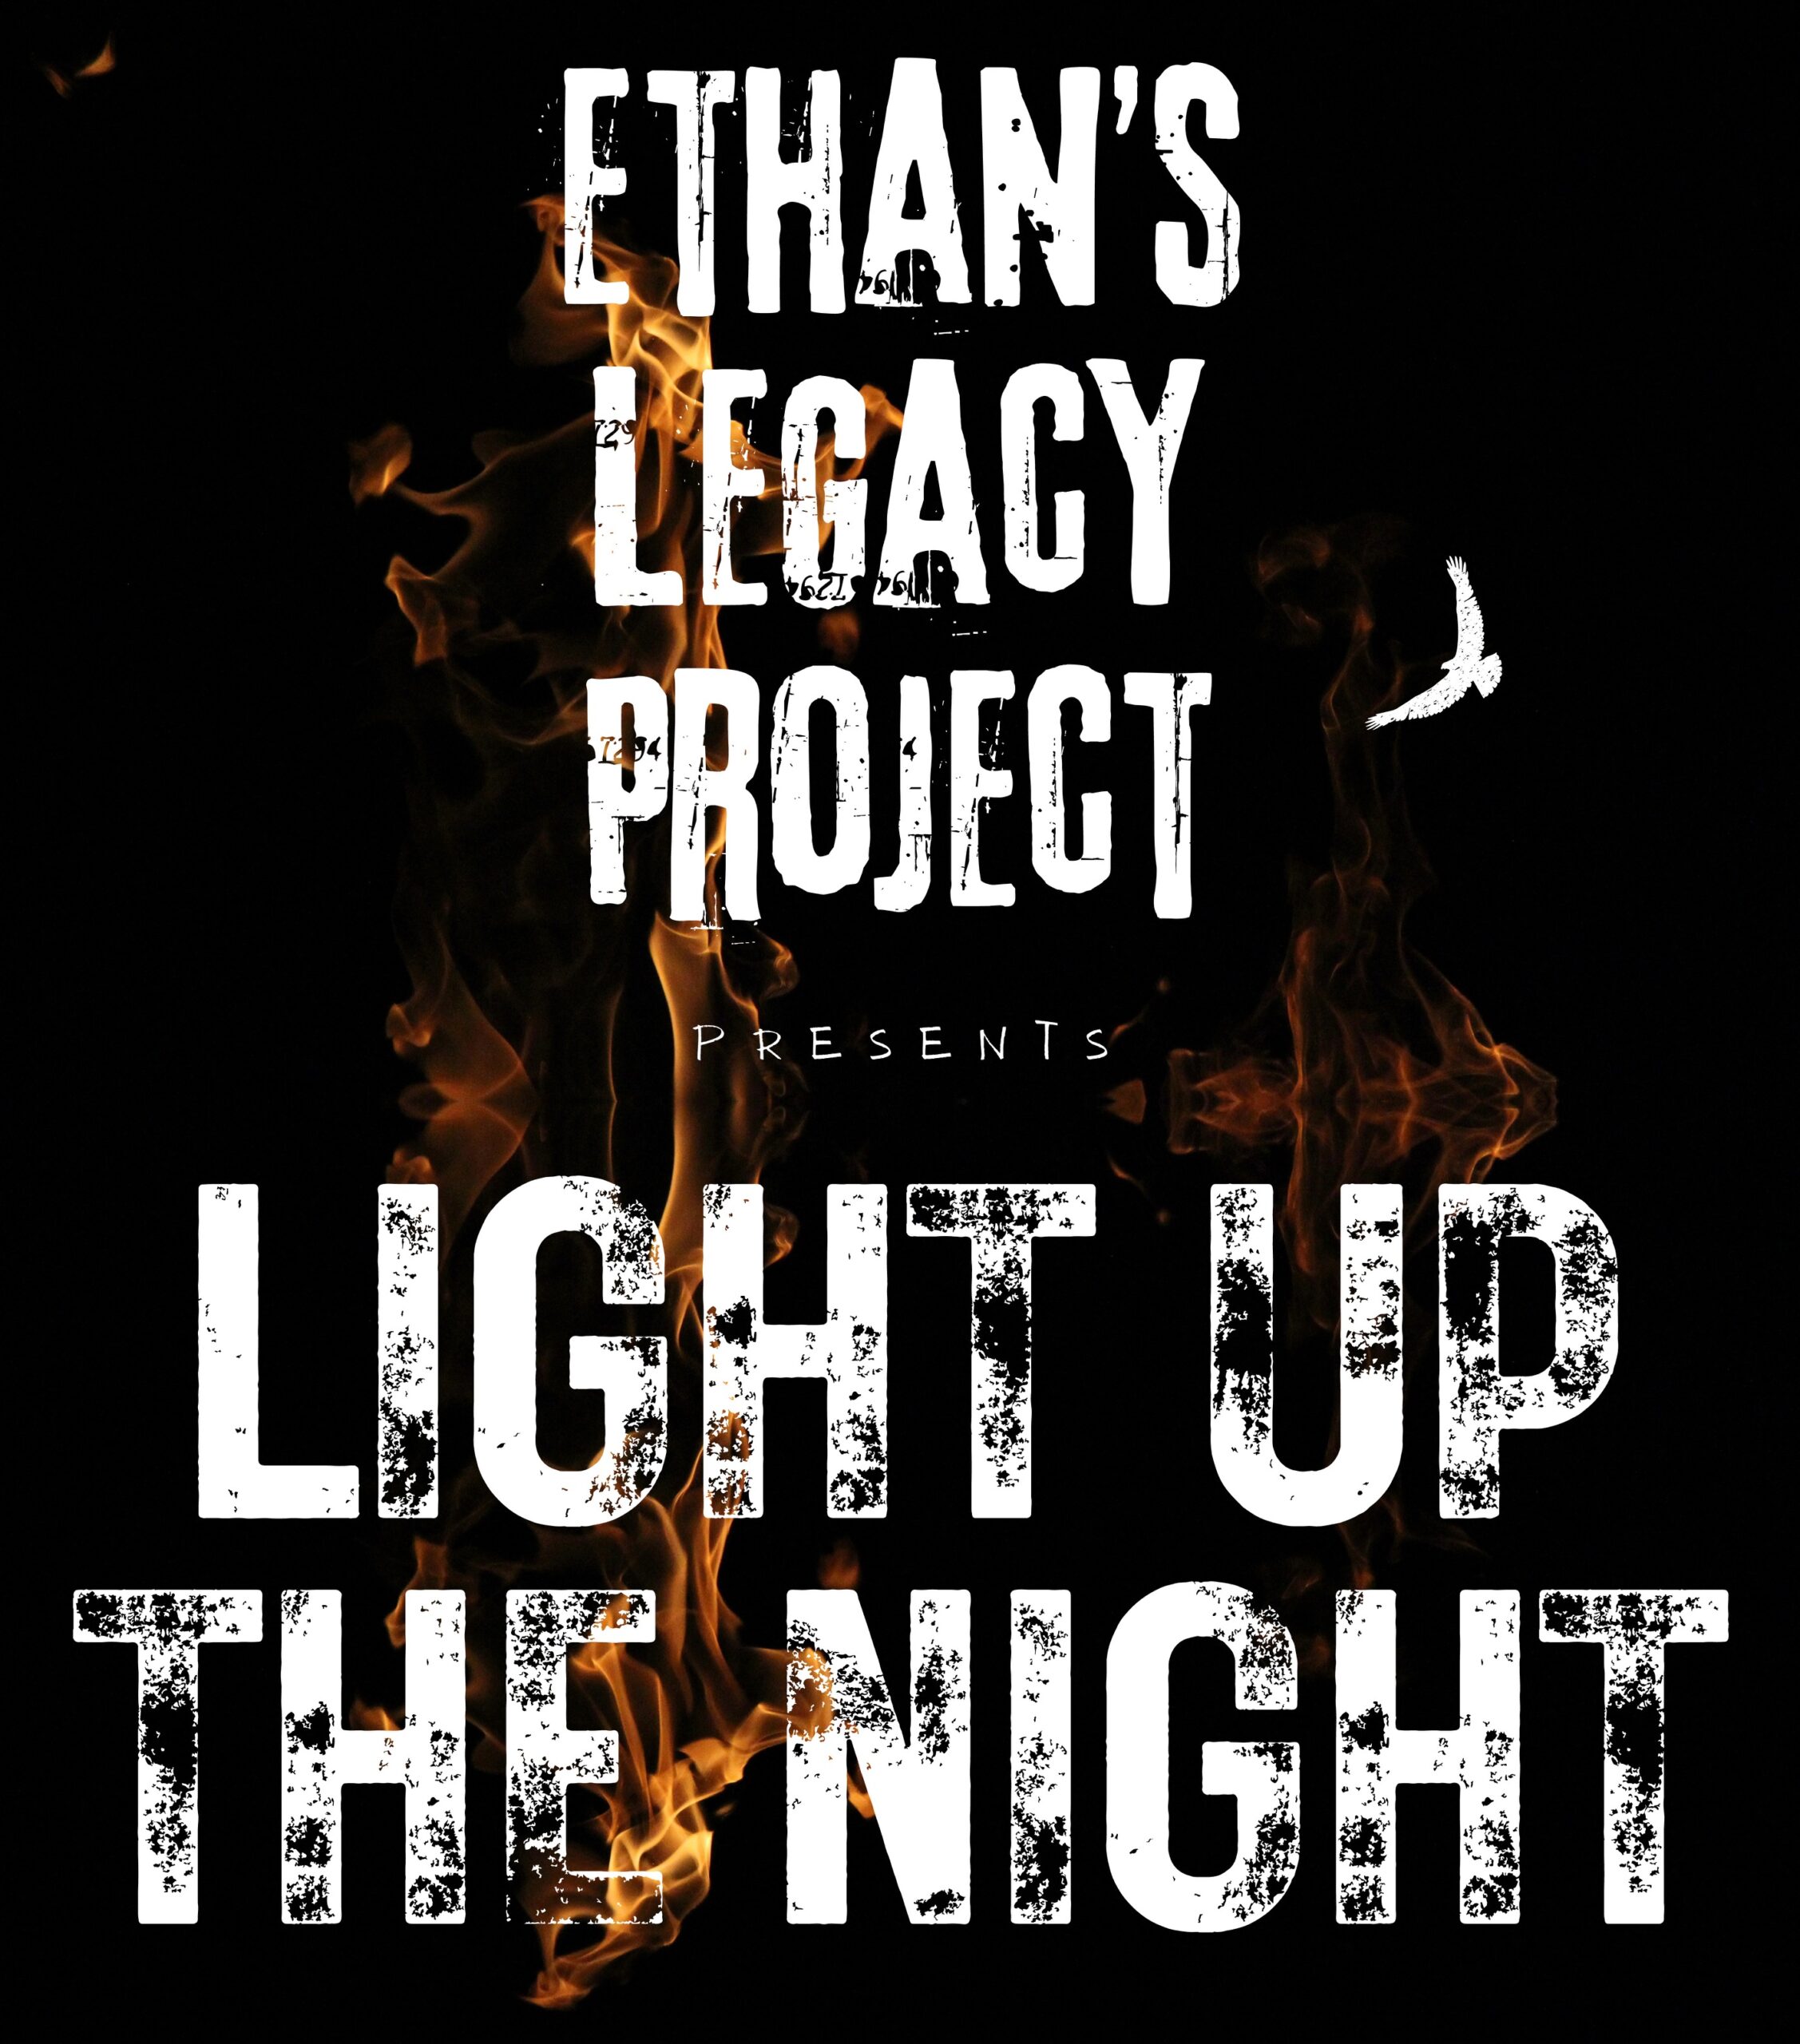 ethan-s-legacy-project